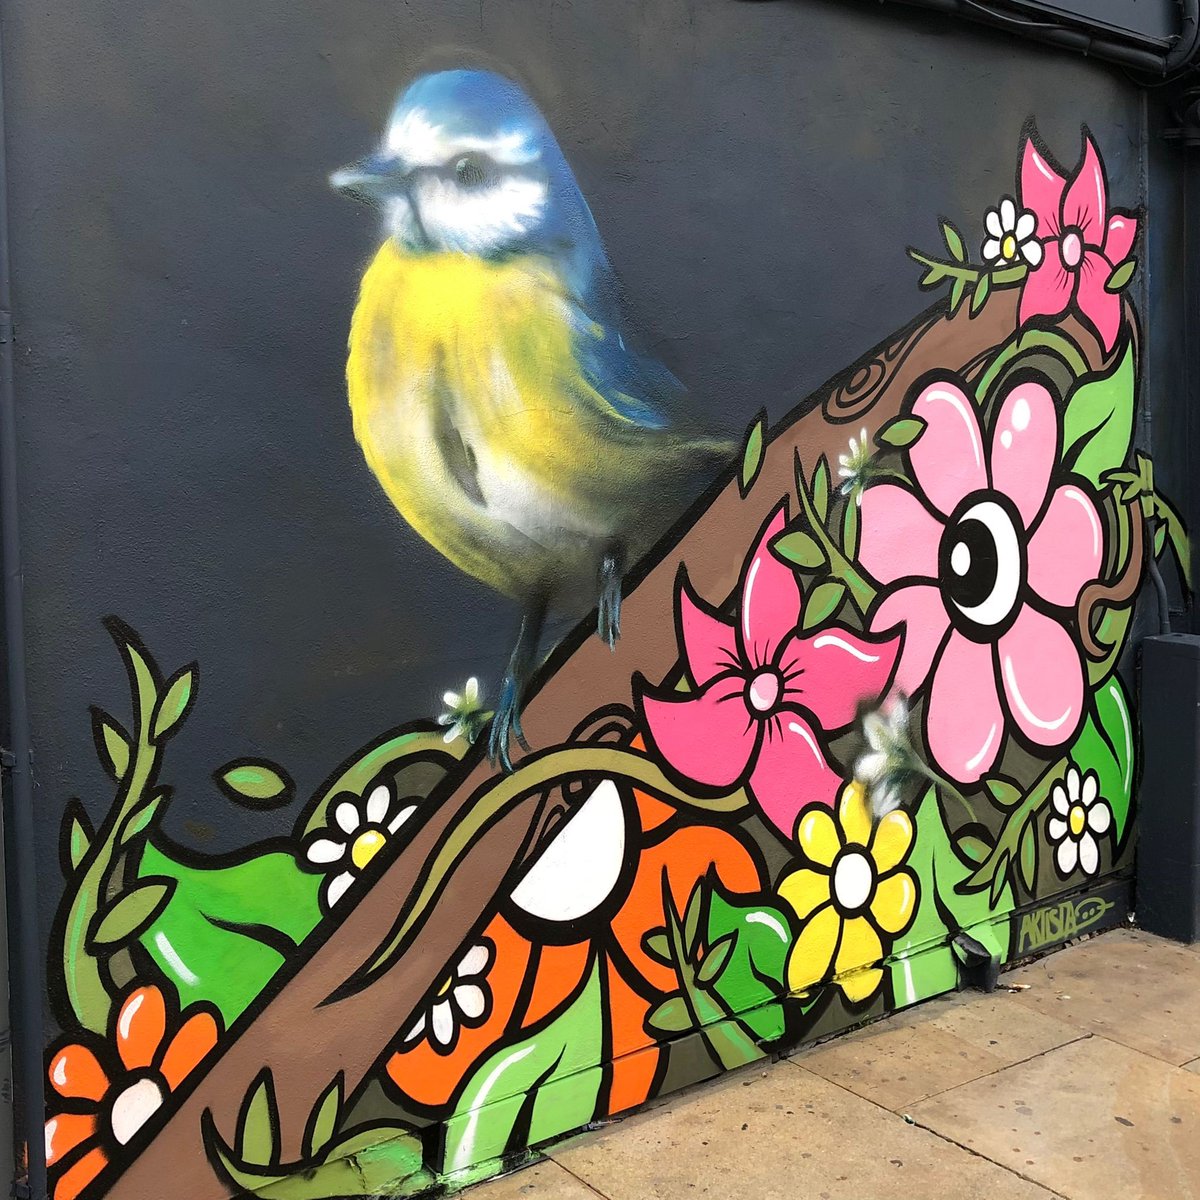 Today's fun fact Chelmsford - The Blue Tit is one of the most sighted birds in the area. ARTiSTA